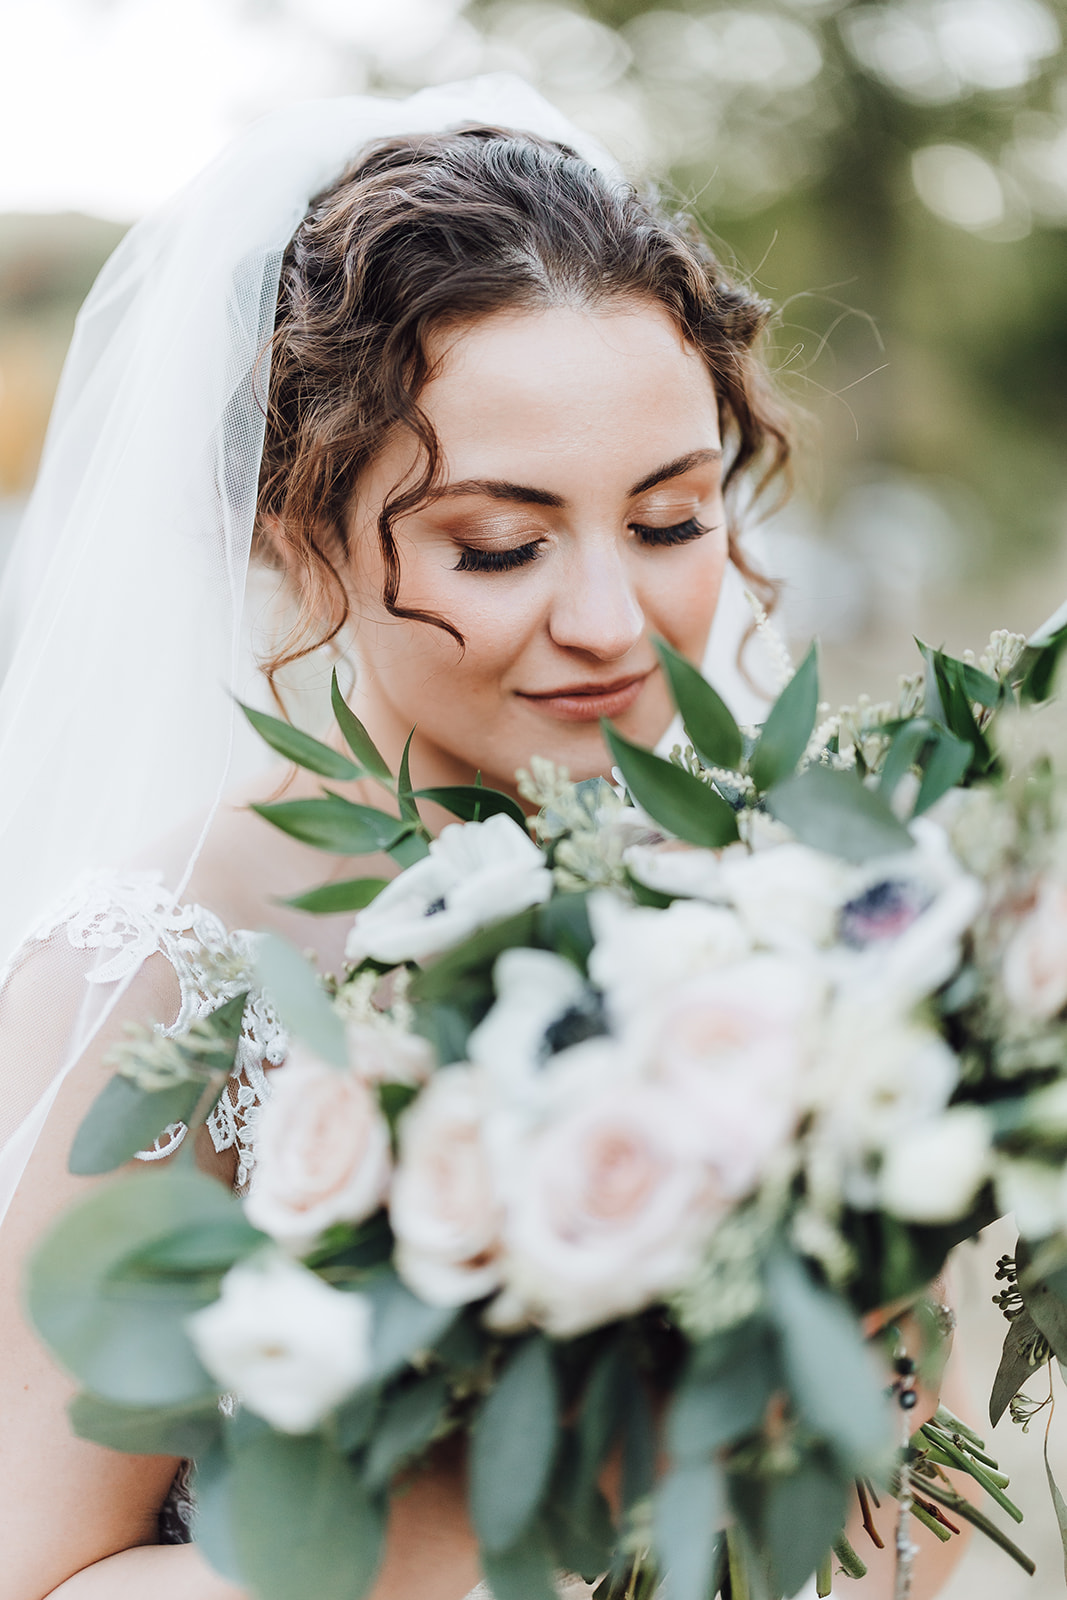 A bride looks down into her large bouquet in a long veil and lace dress